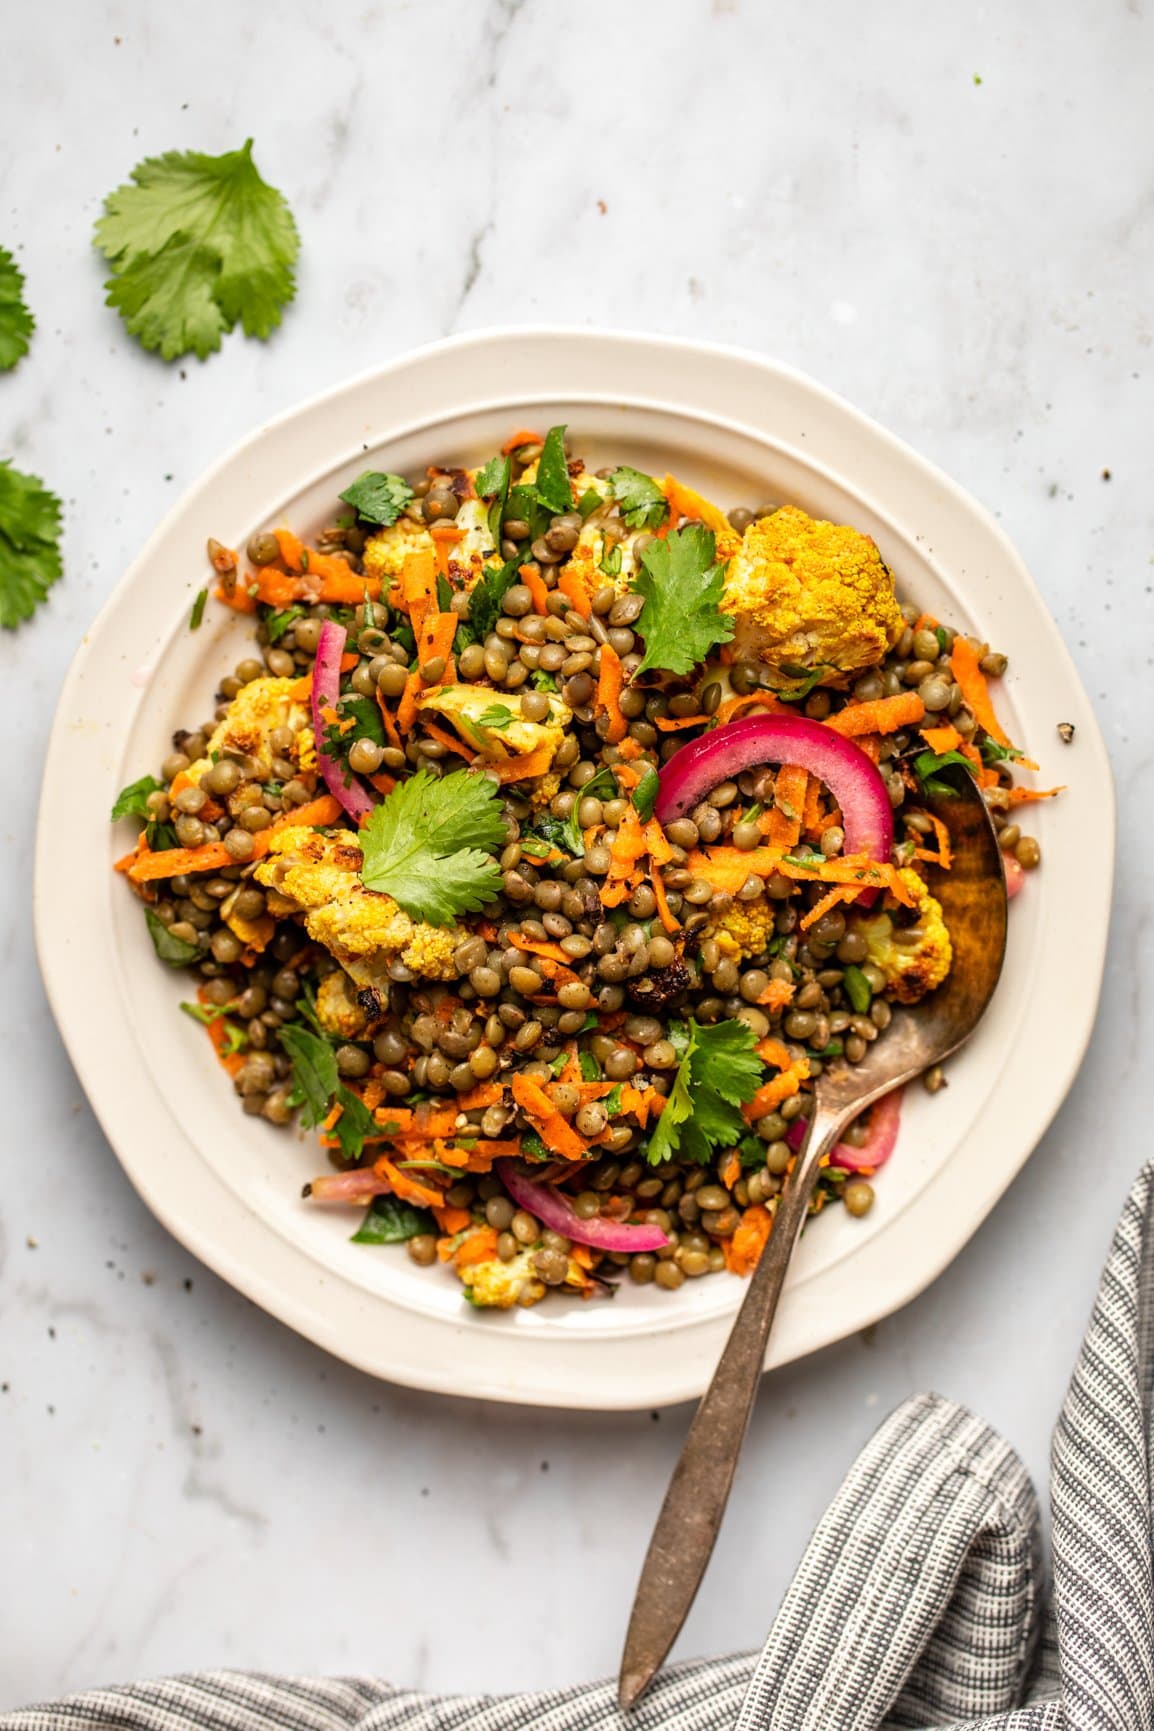 Curried lentil salad with fresh coriander on white plate with spoon and striped napkin